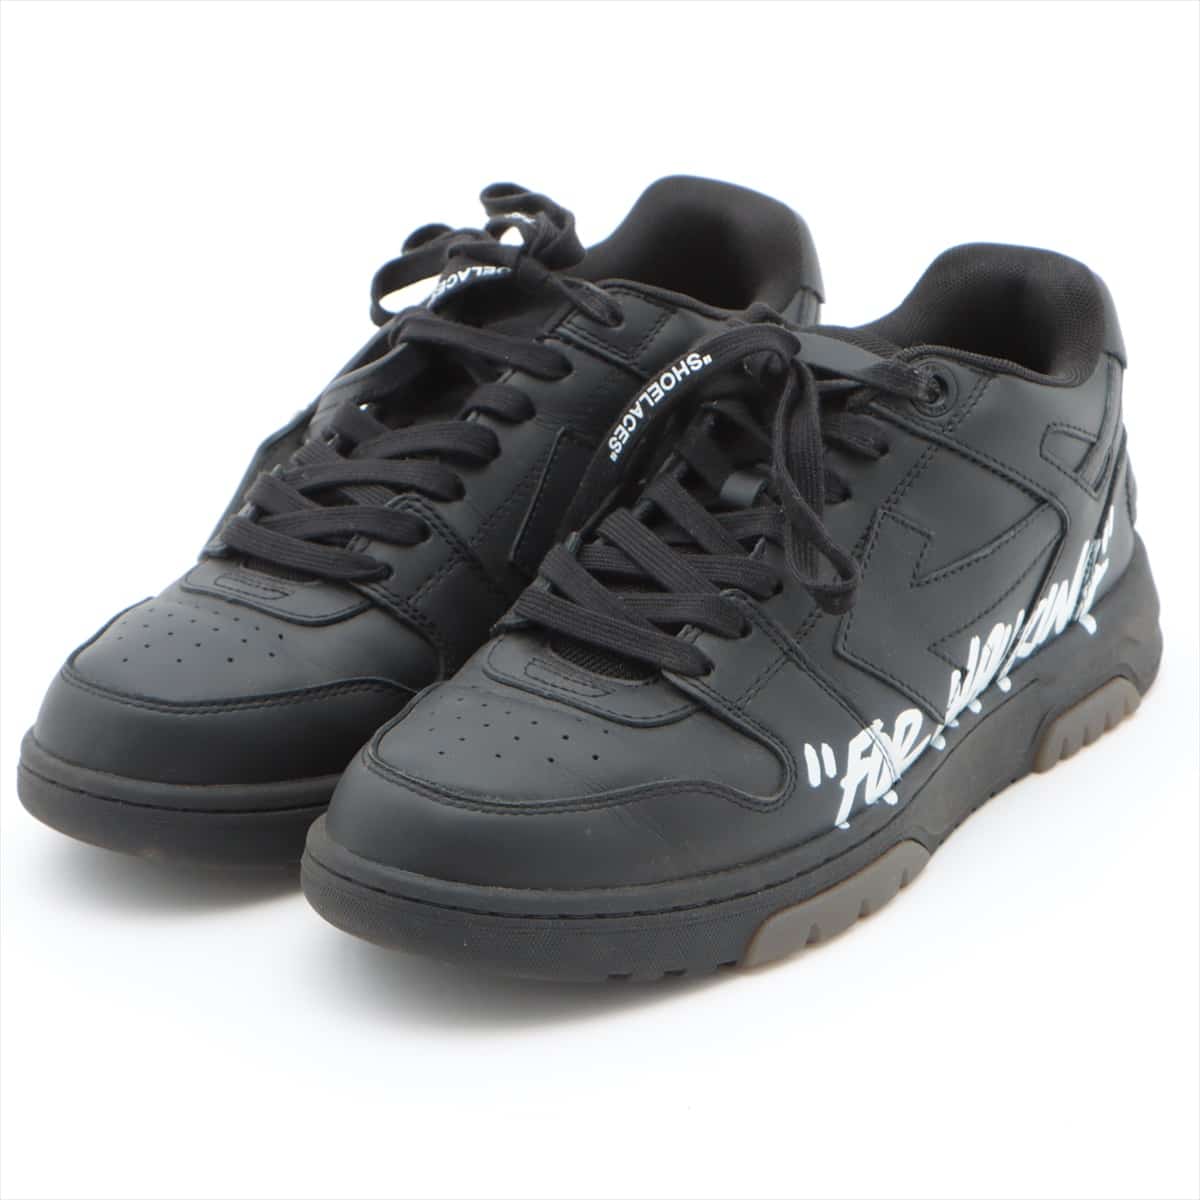 Off-White Leather Sneakers 40 Men's Black Out Of Office For Walking